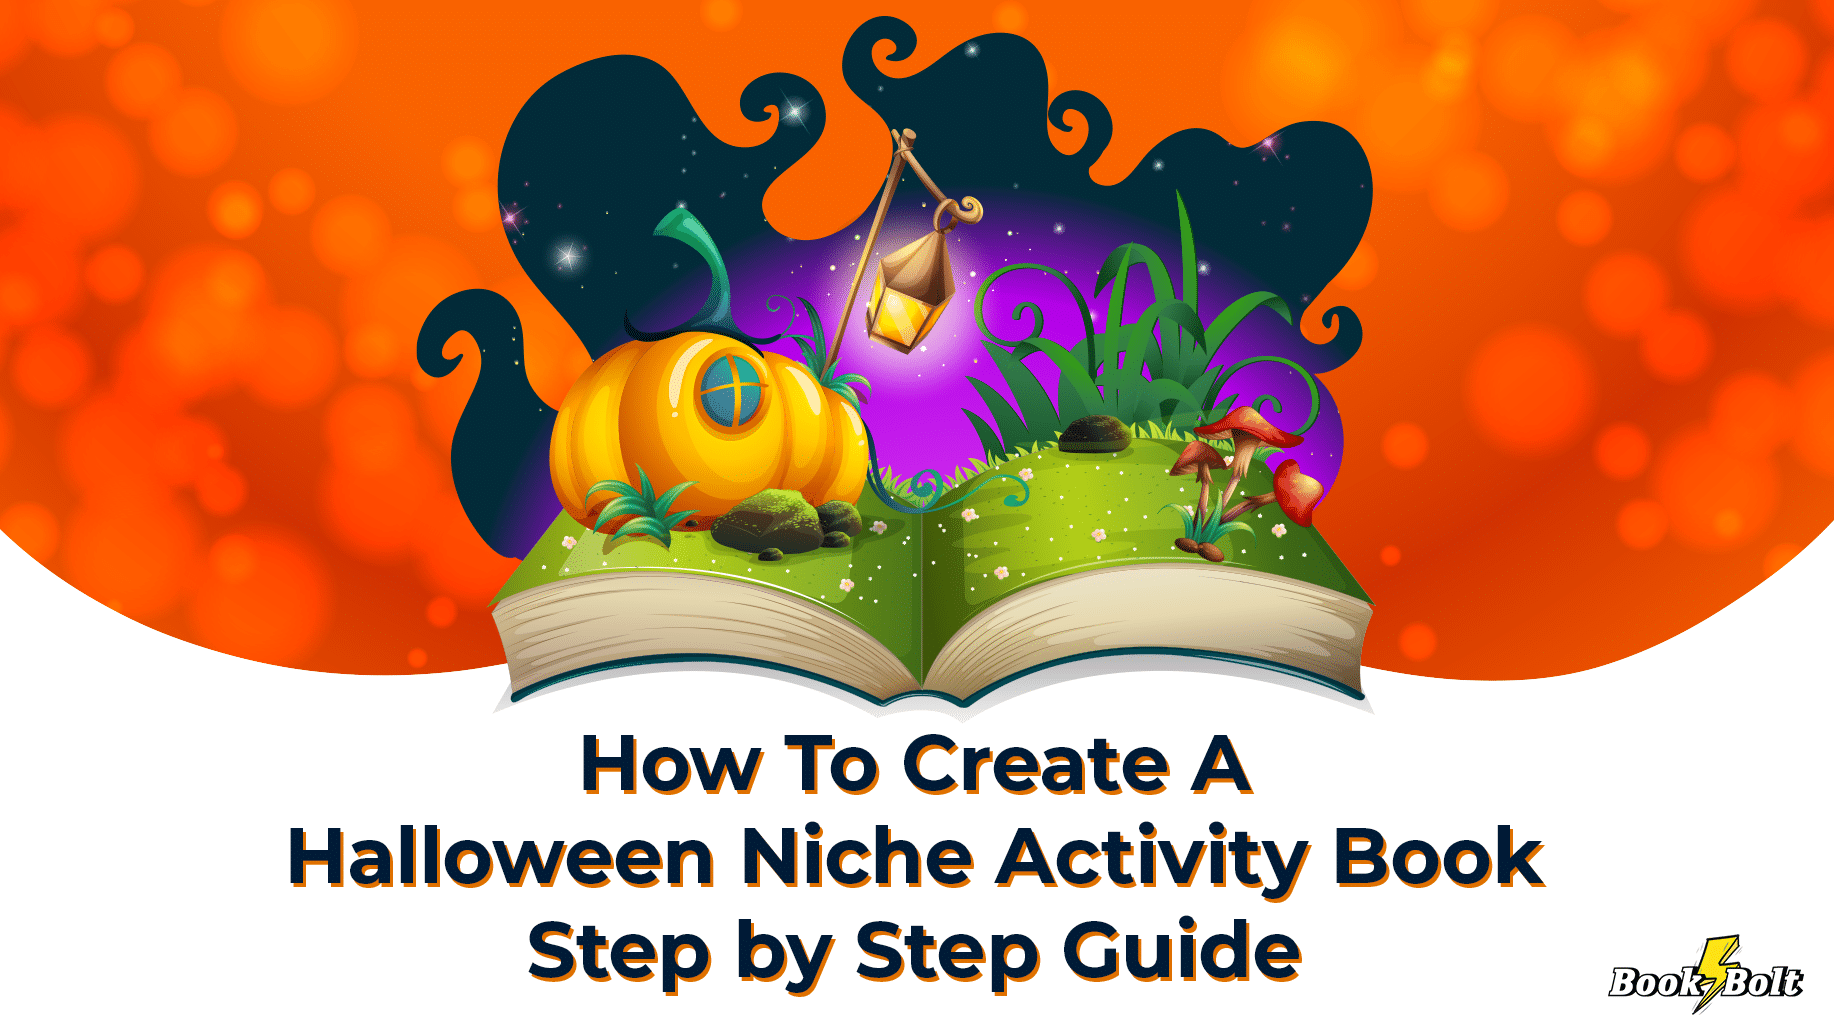 https://bookbolt.io/wp-content/uploads/2020/09/how-to-create-a-halloween-niche-activity-book.png